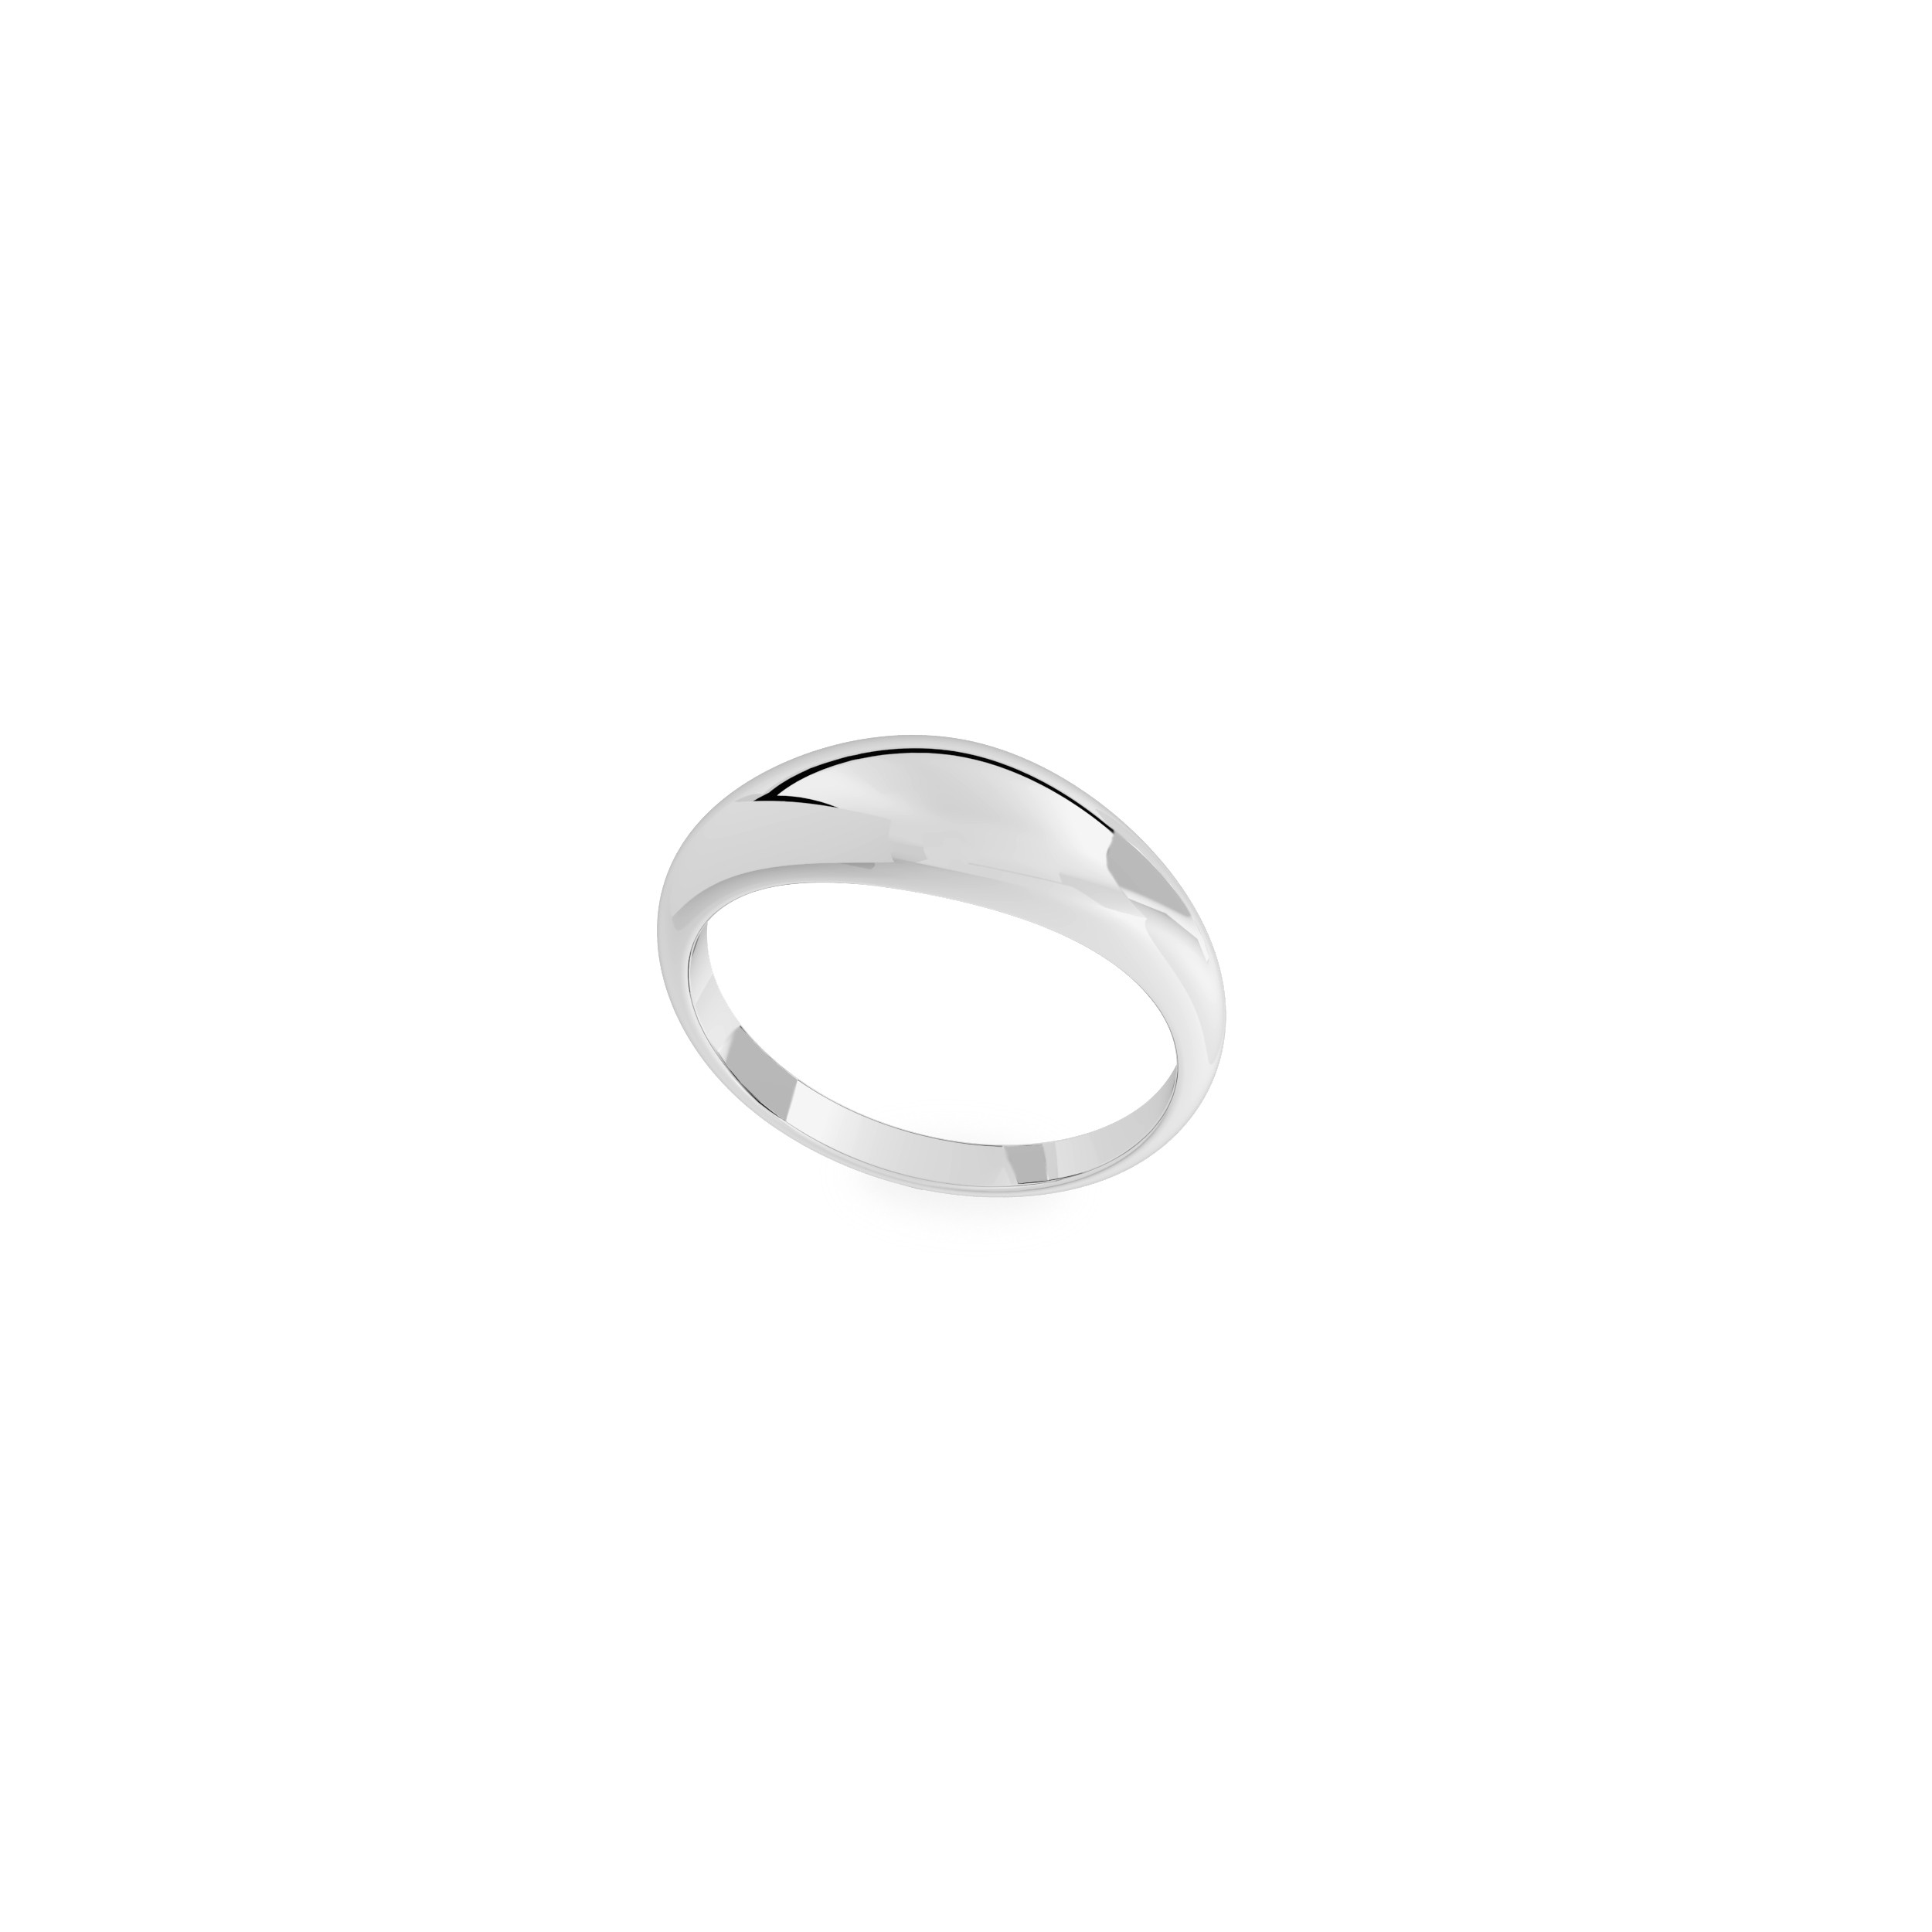 Oval ring, sterling silver 925